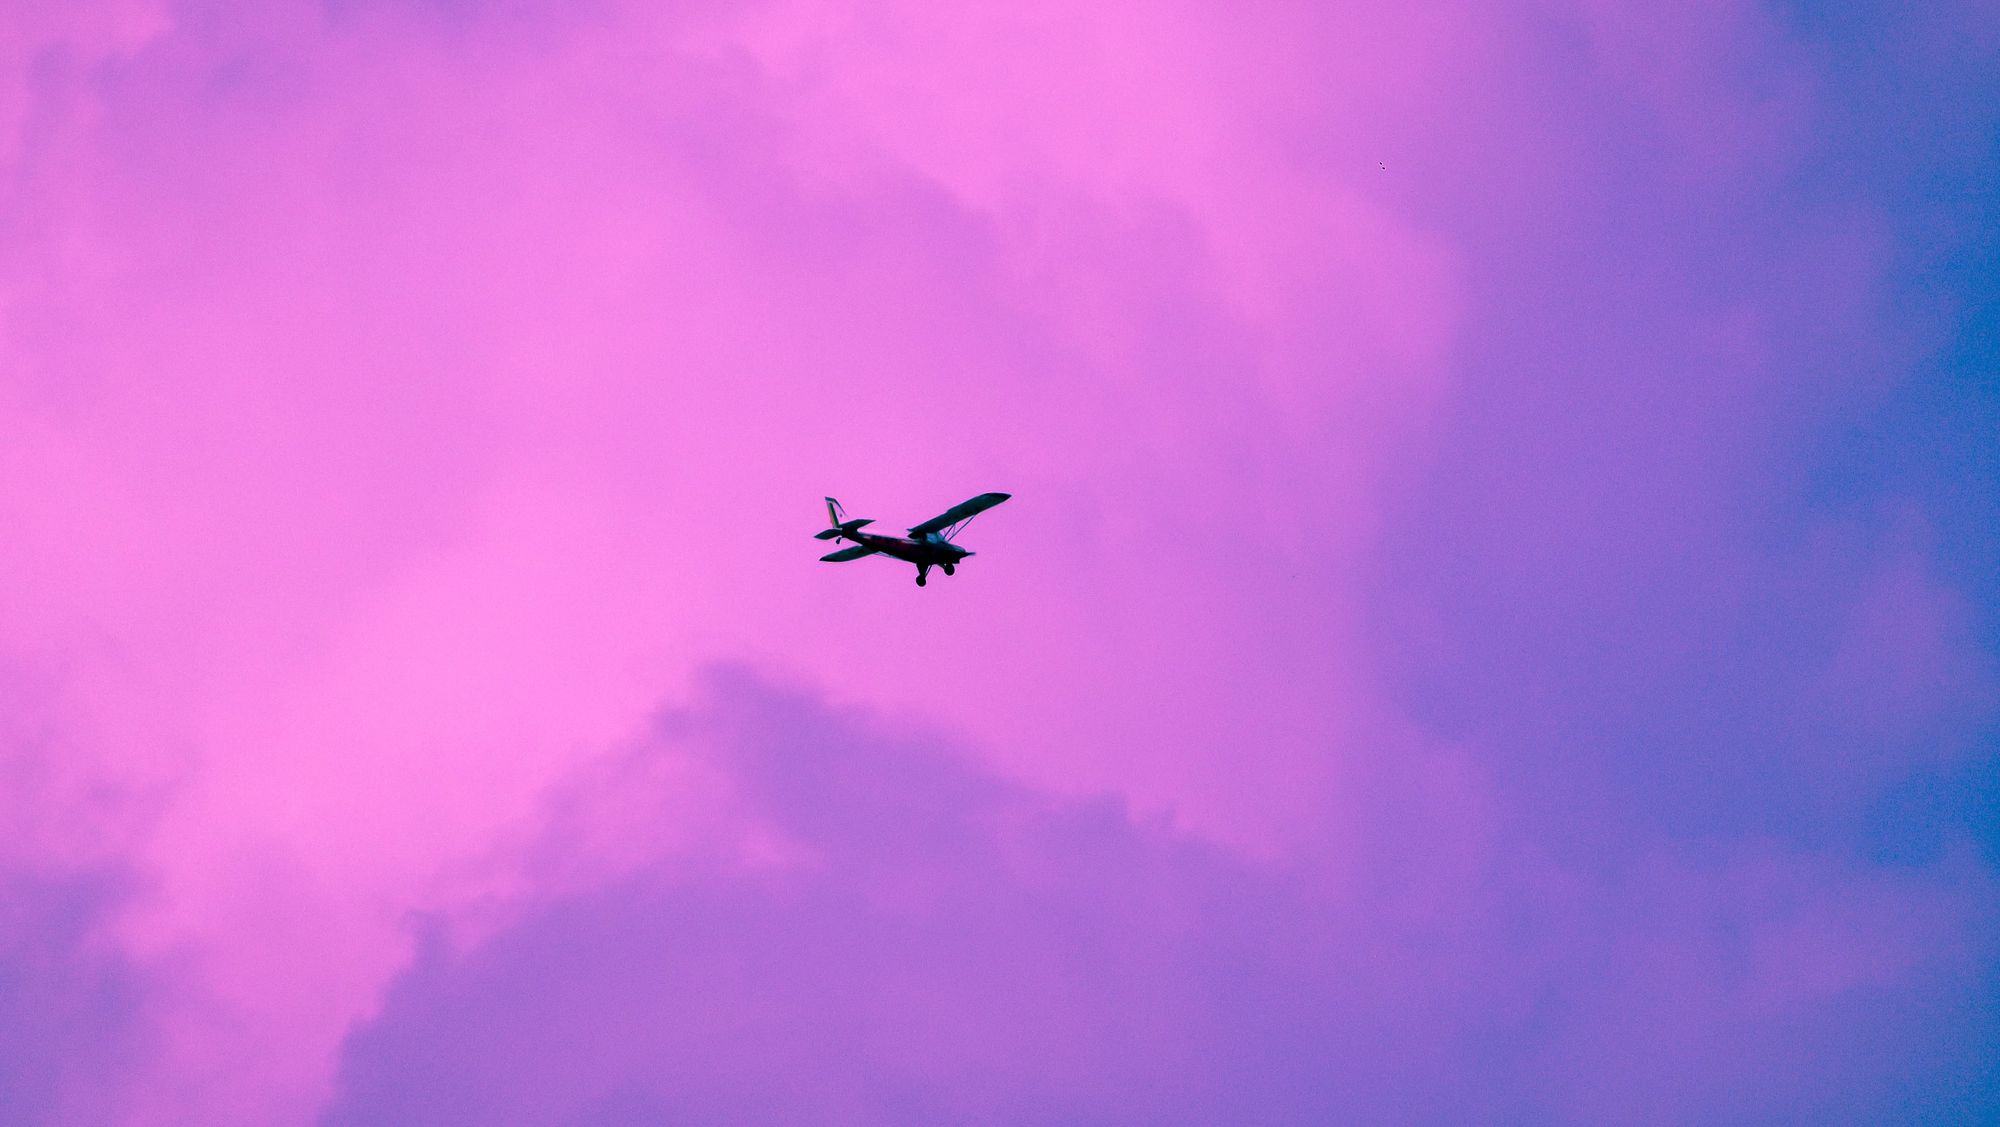 Plane and pink clouds, Buffer